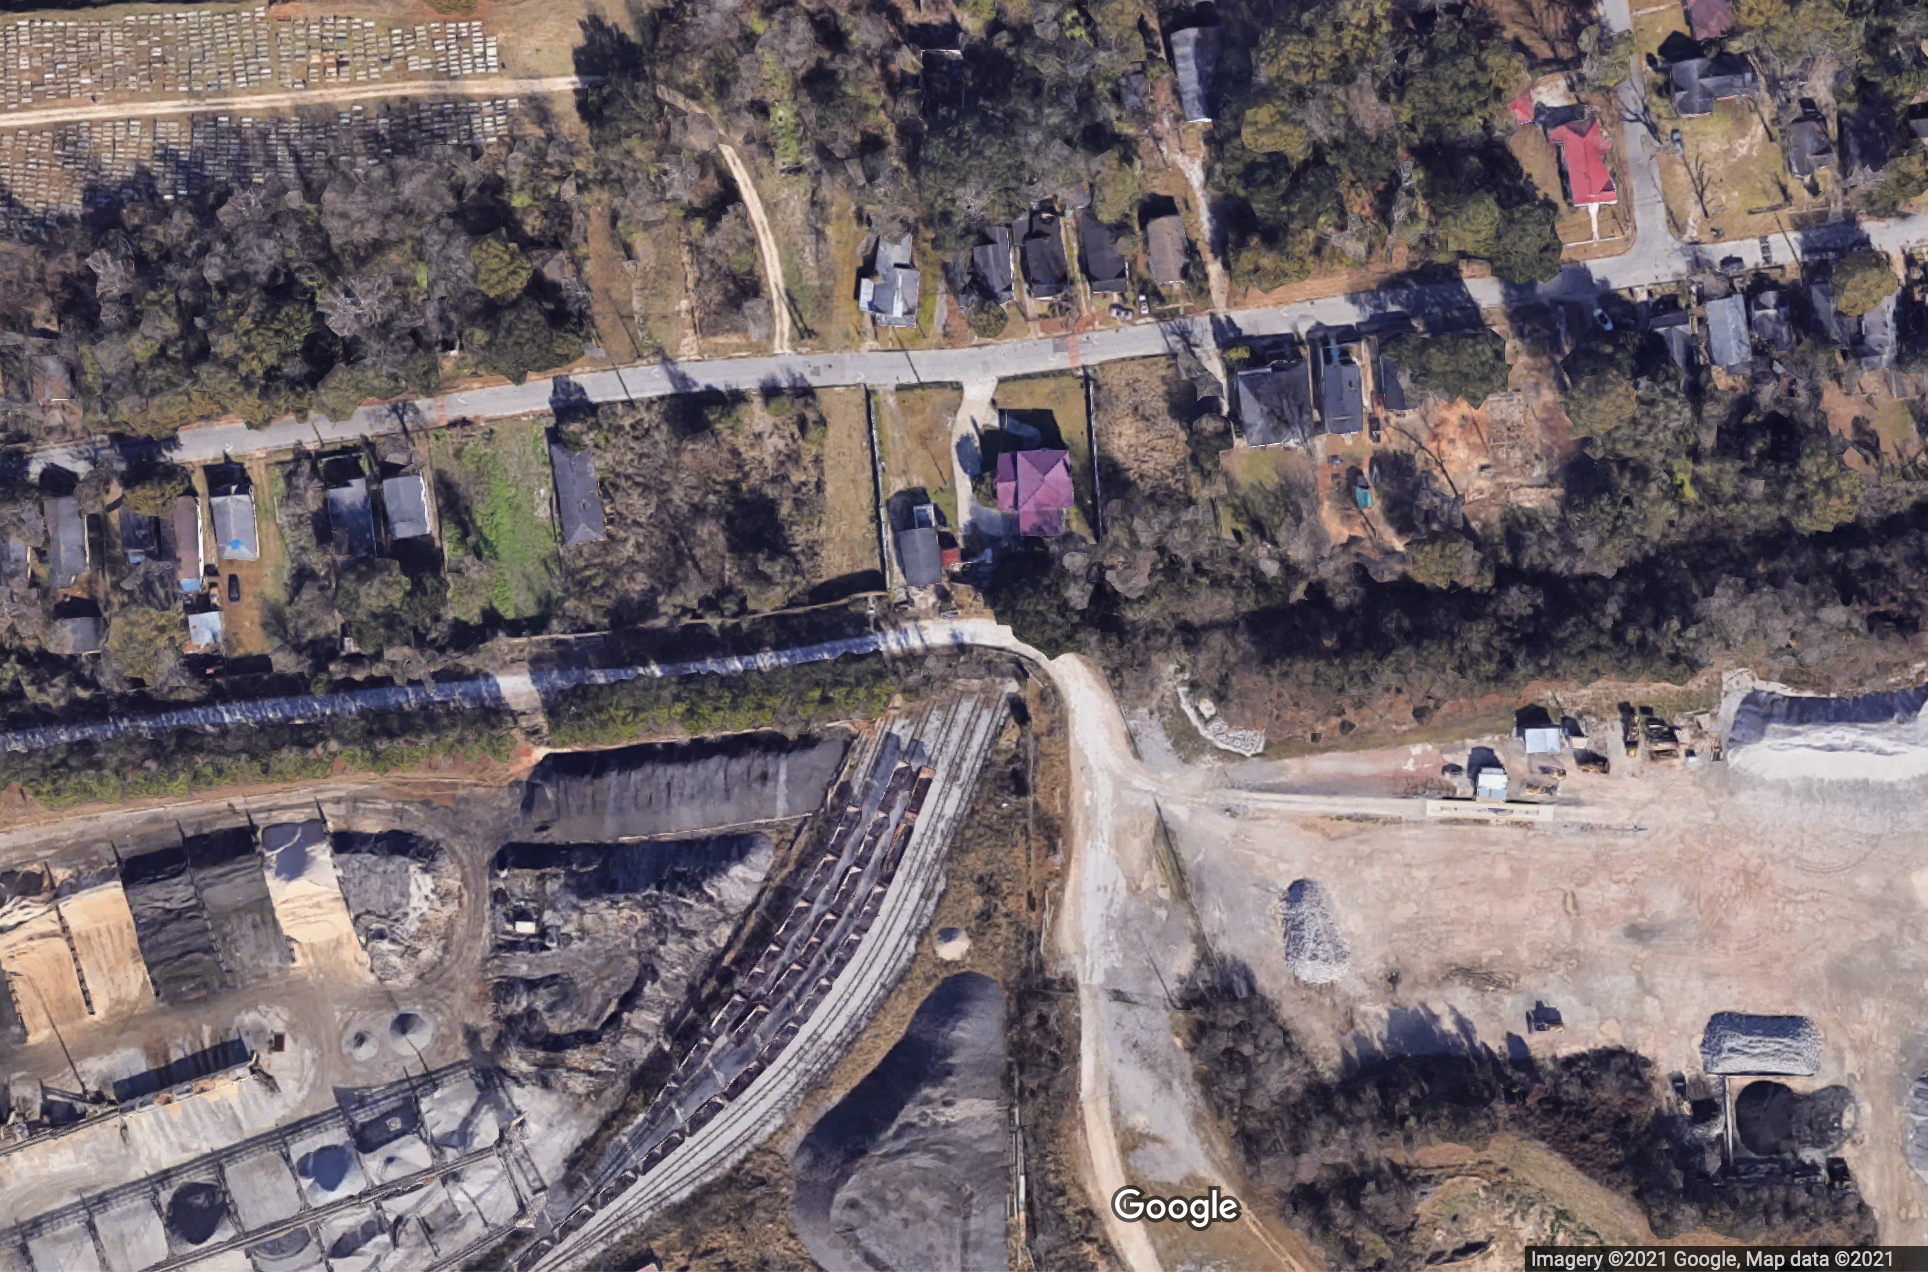 An satellite image of homes with industrial activities just along their backyard fences.